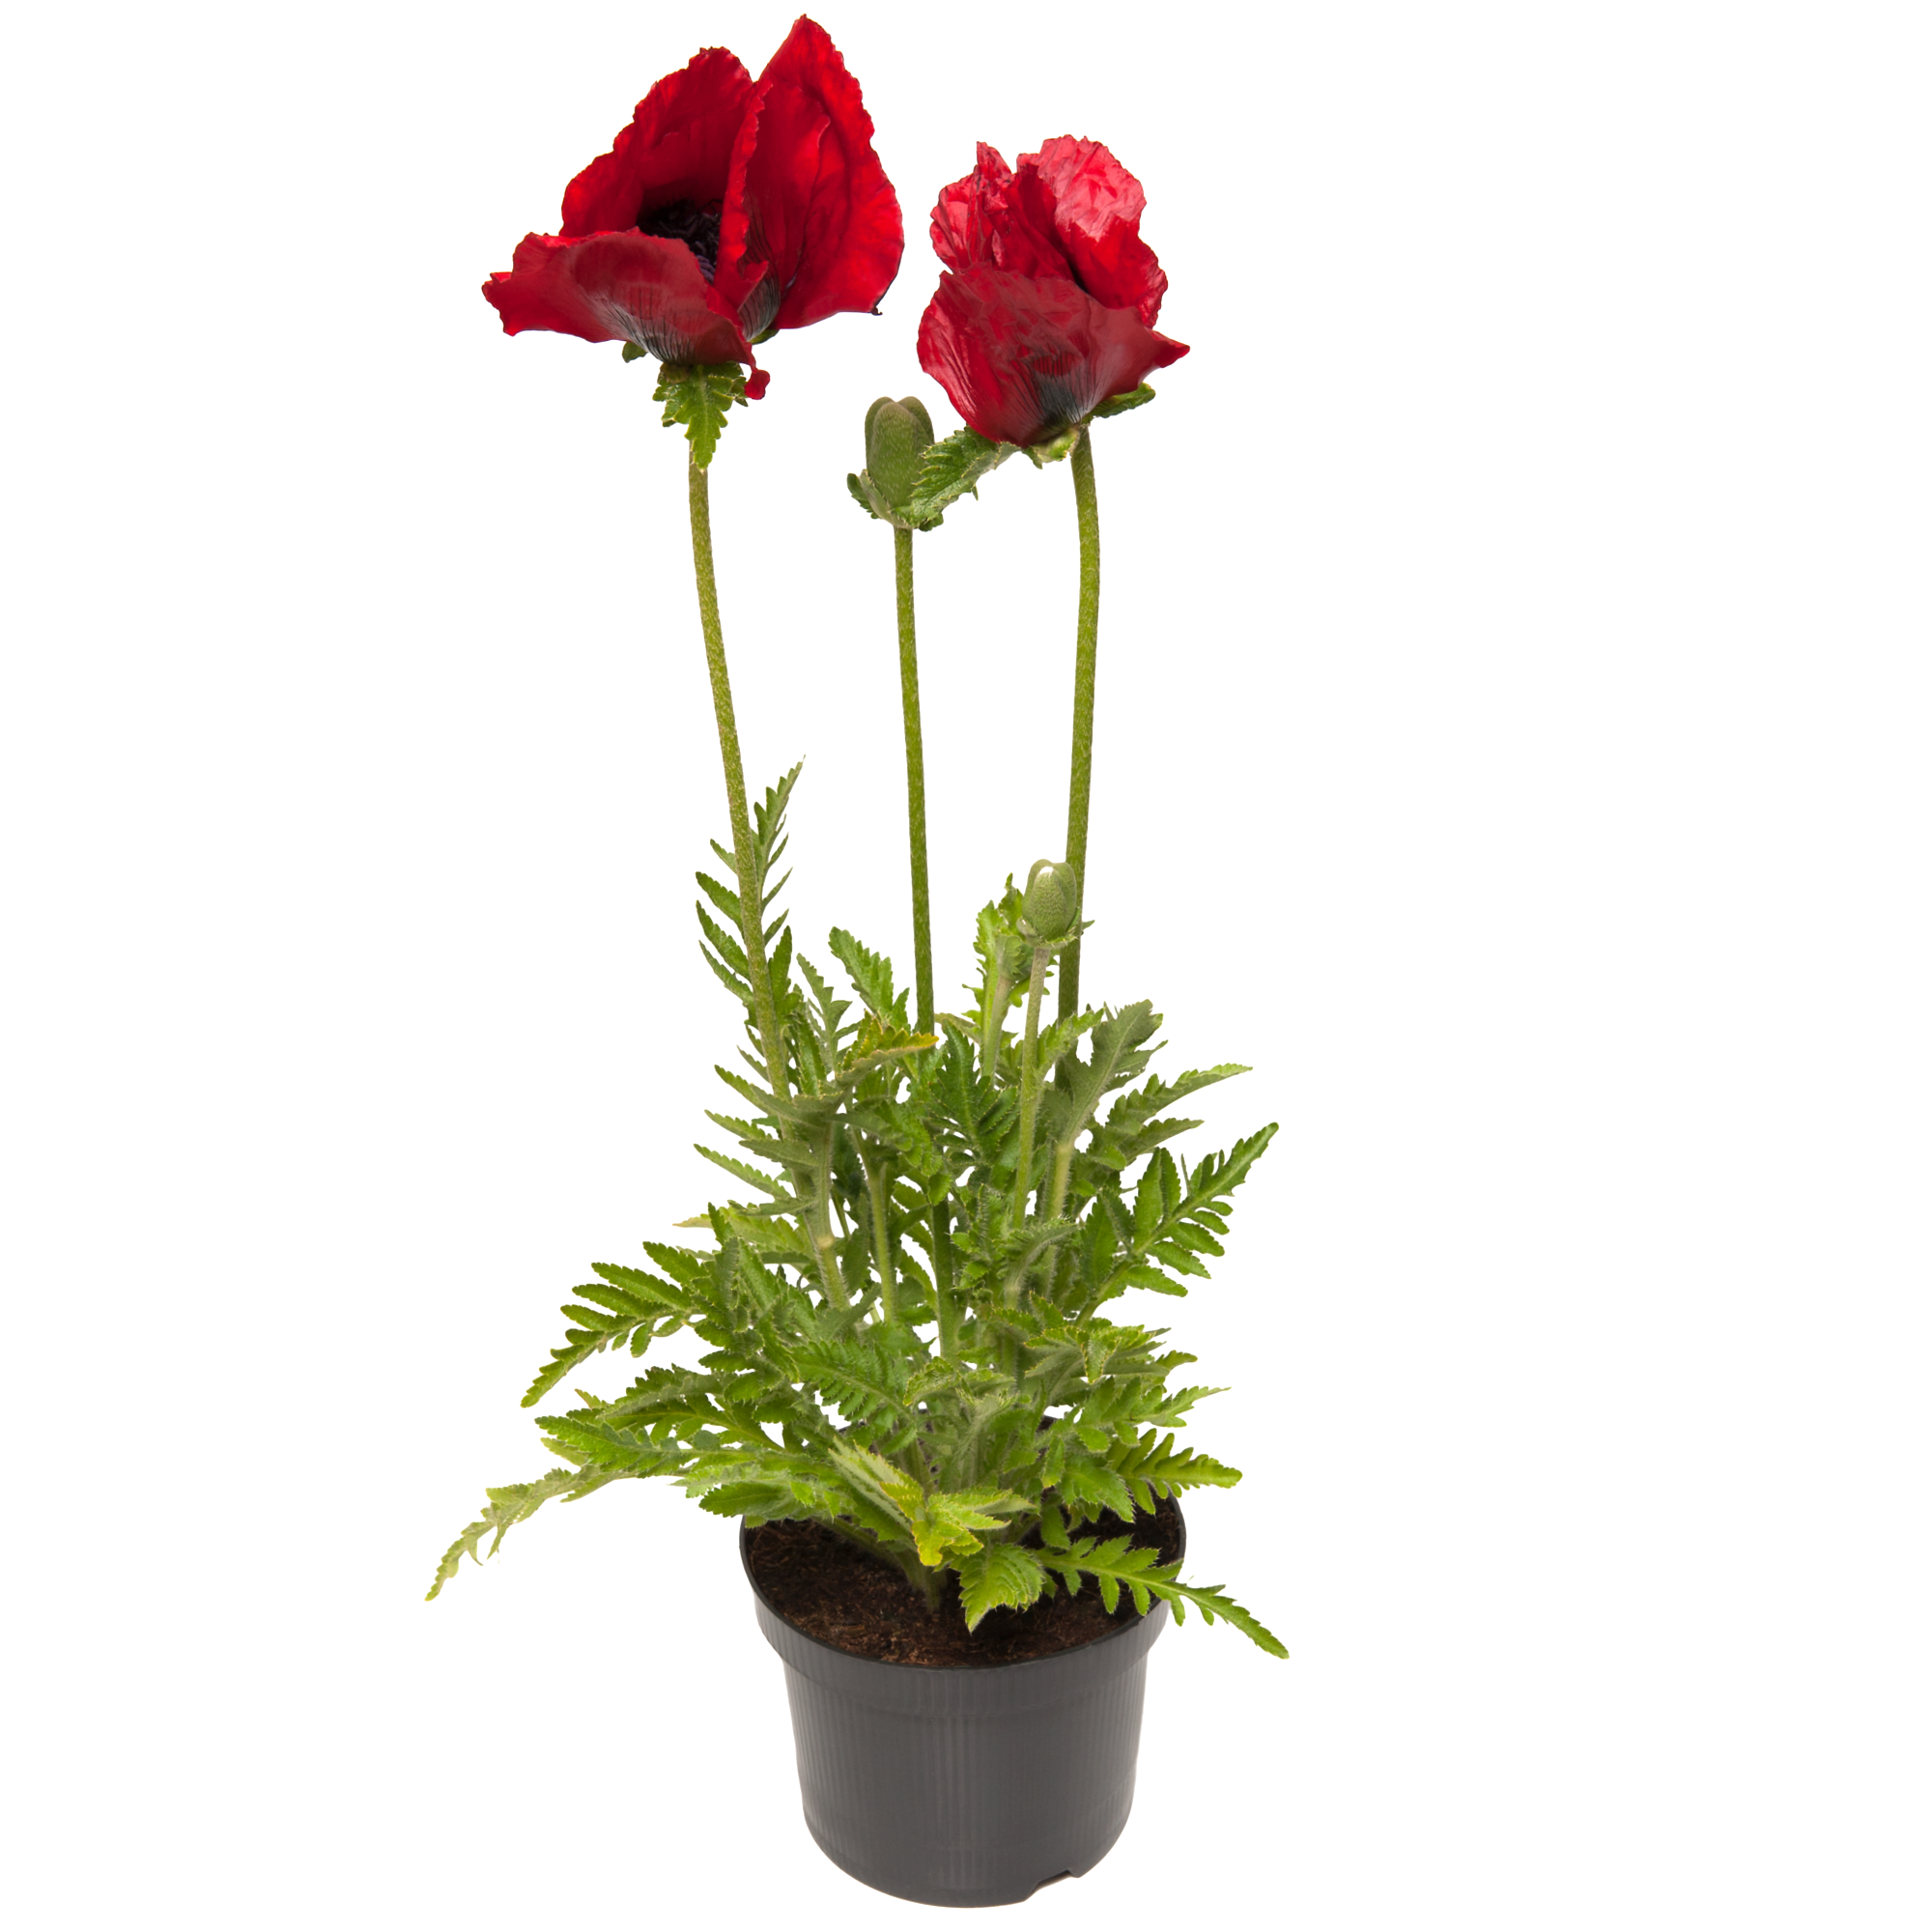 Mohn 'Beauty of Livermere' rot 15 cm Topf + product picture